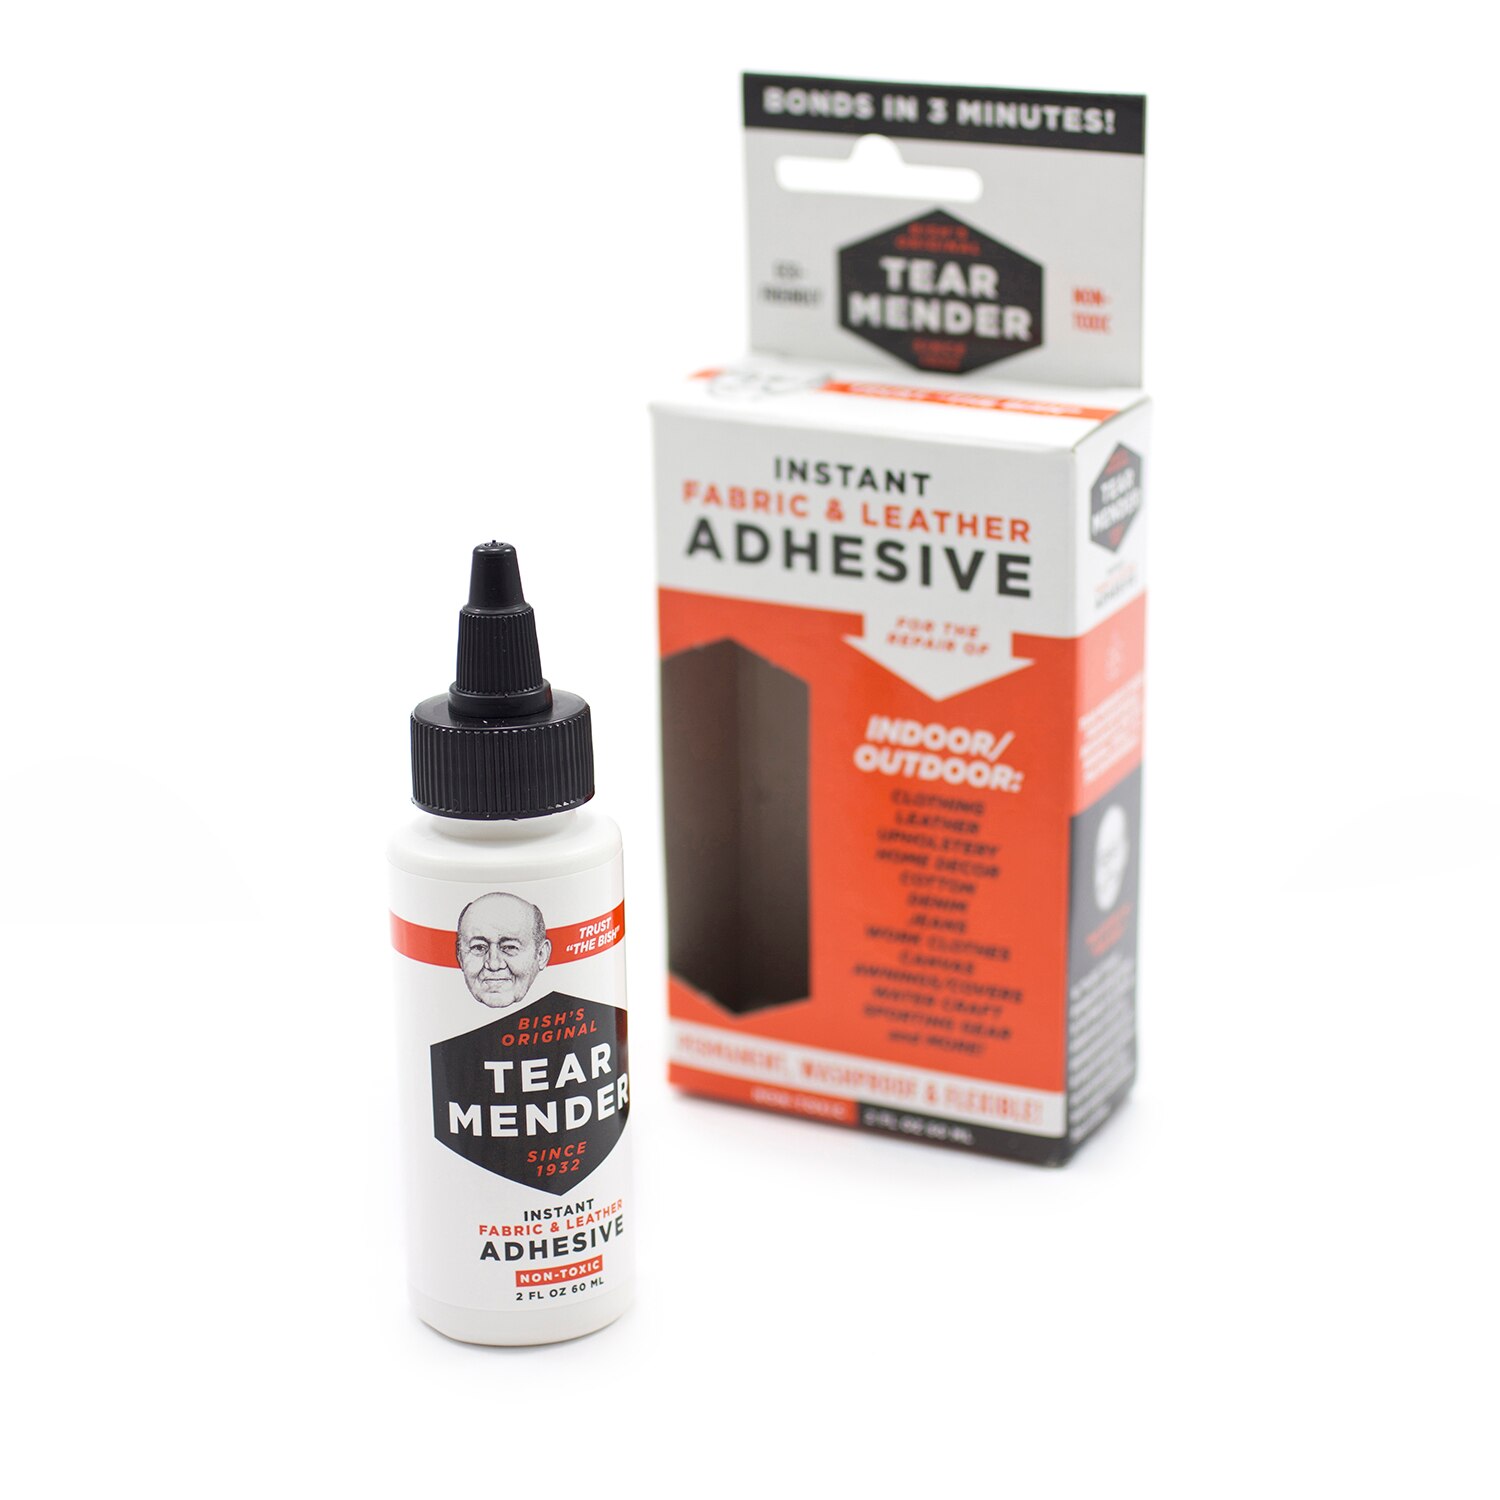  Leather Glue,Leather Fabric Adhesive,Tear Mender